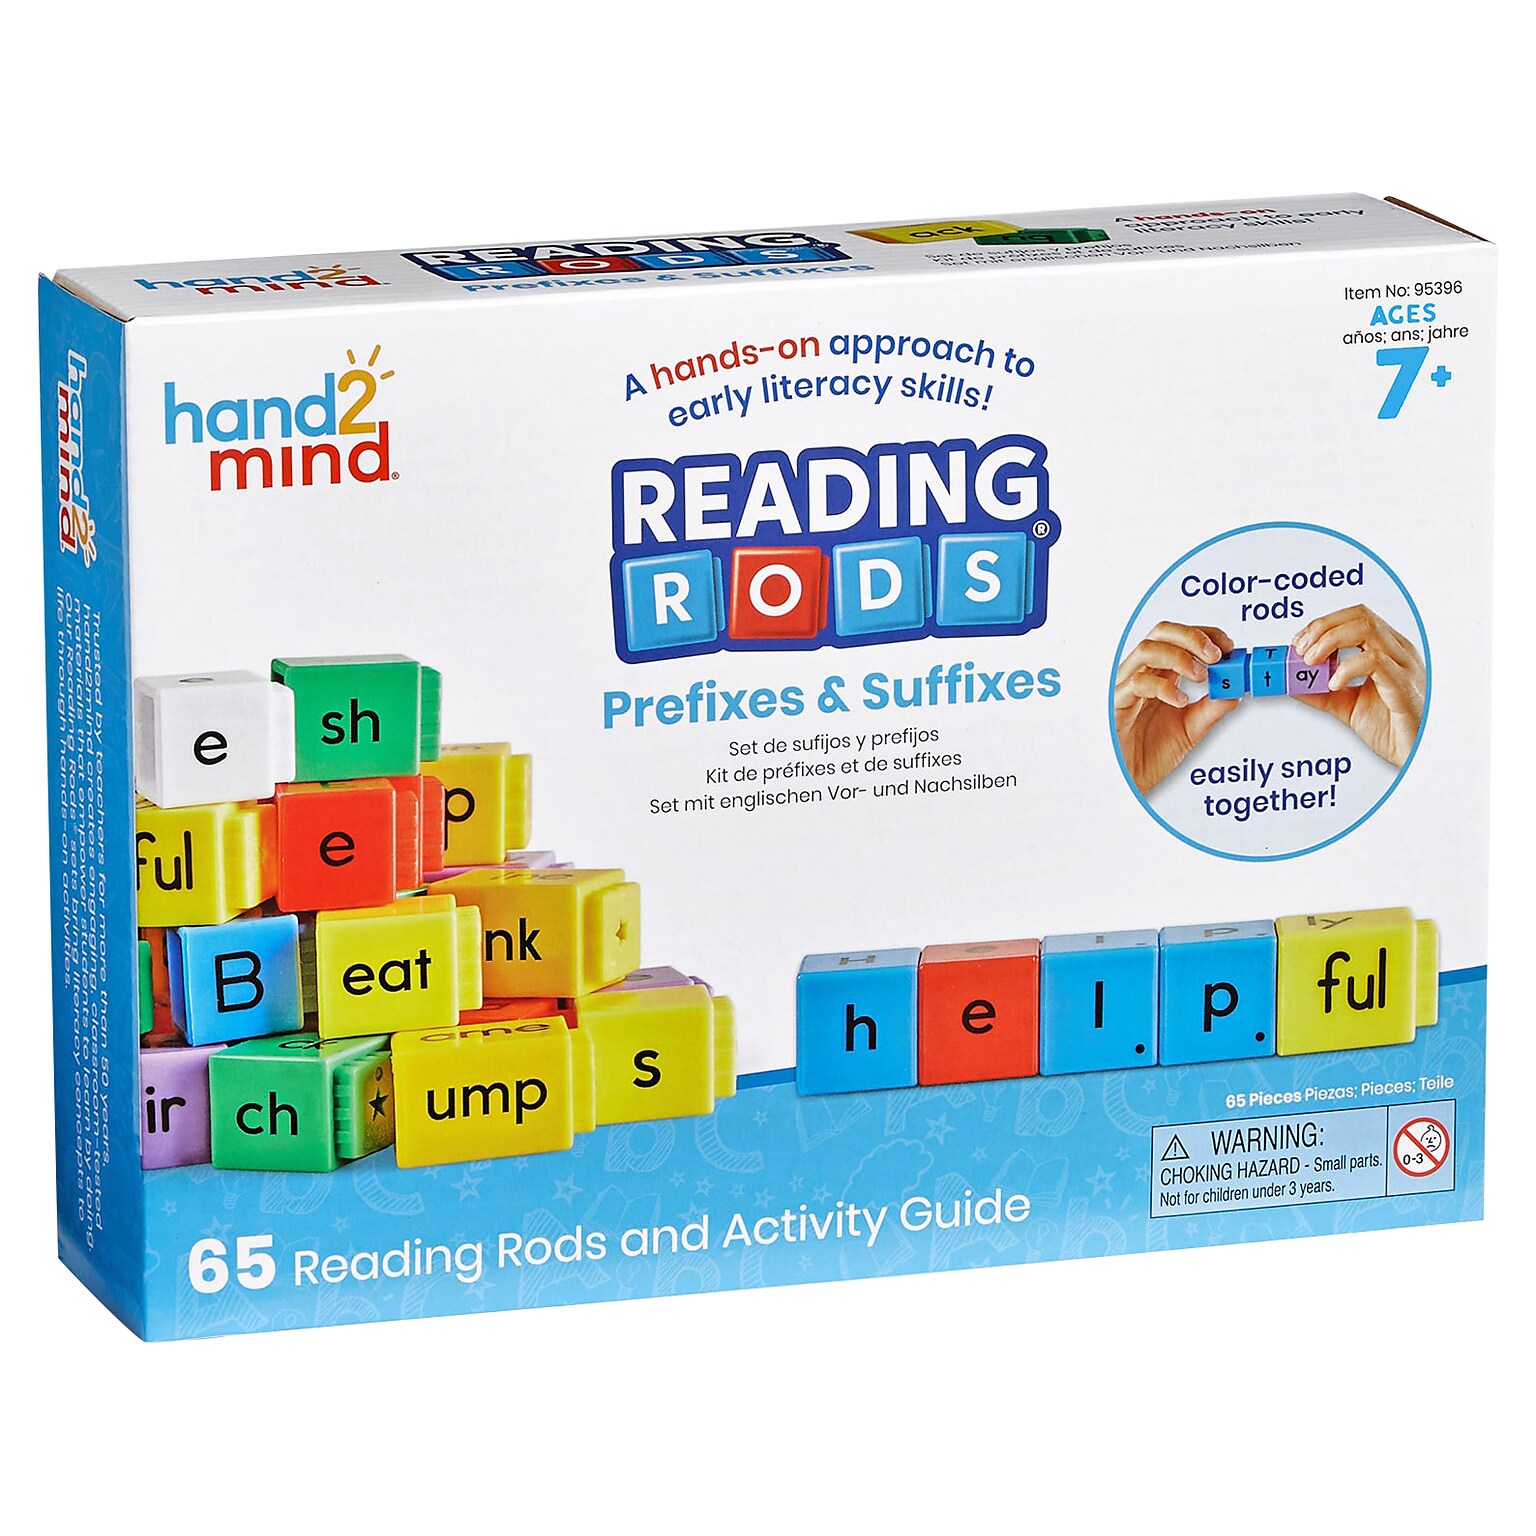 hand2mind Reading Rods Prefixes & Suffixes (95396)